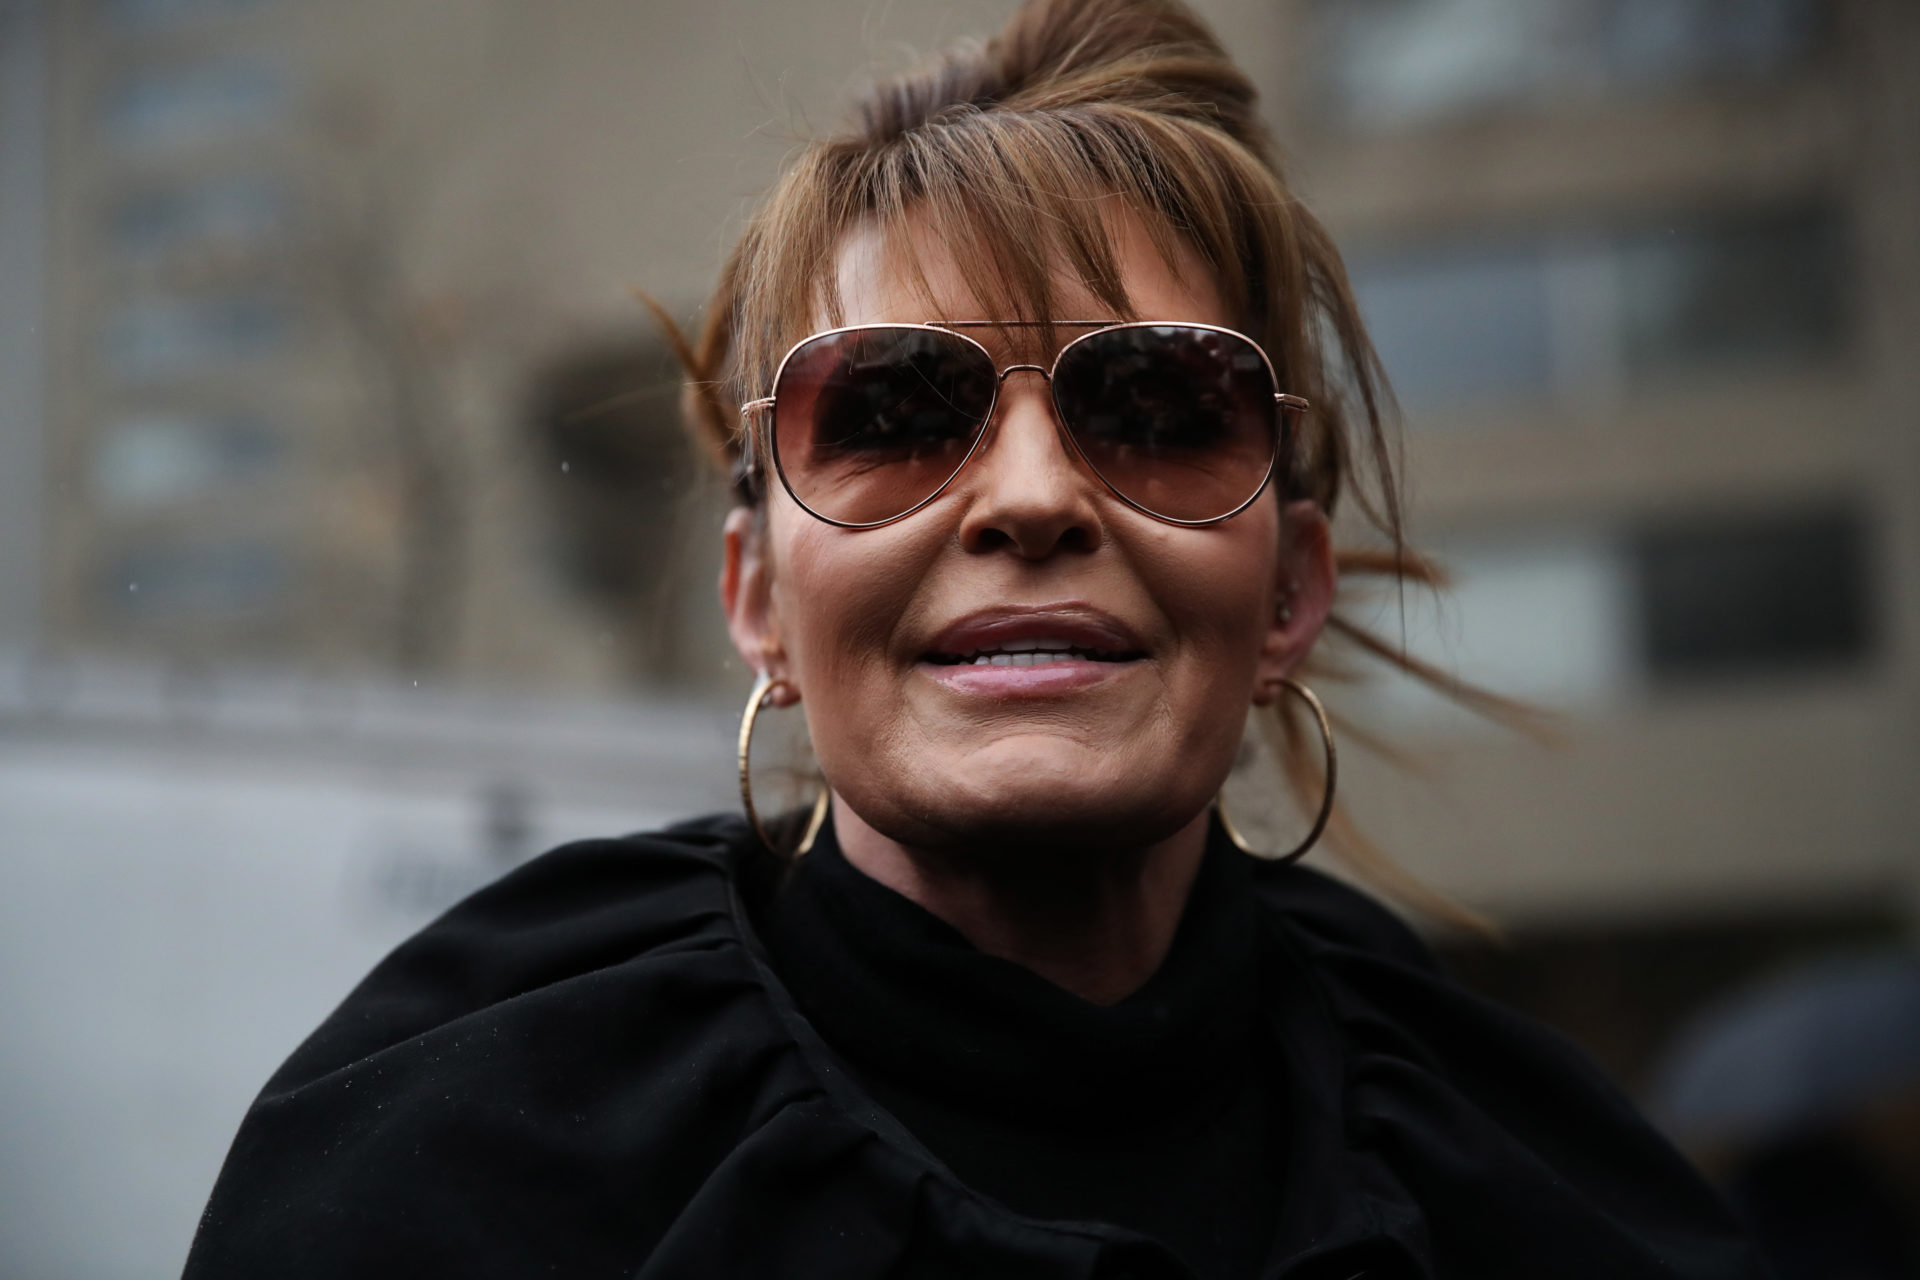 Sarah Palin's Defamation Suit Against The New York Times Goes To Court